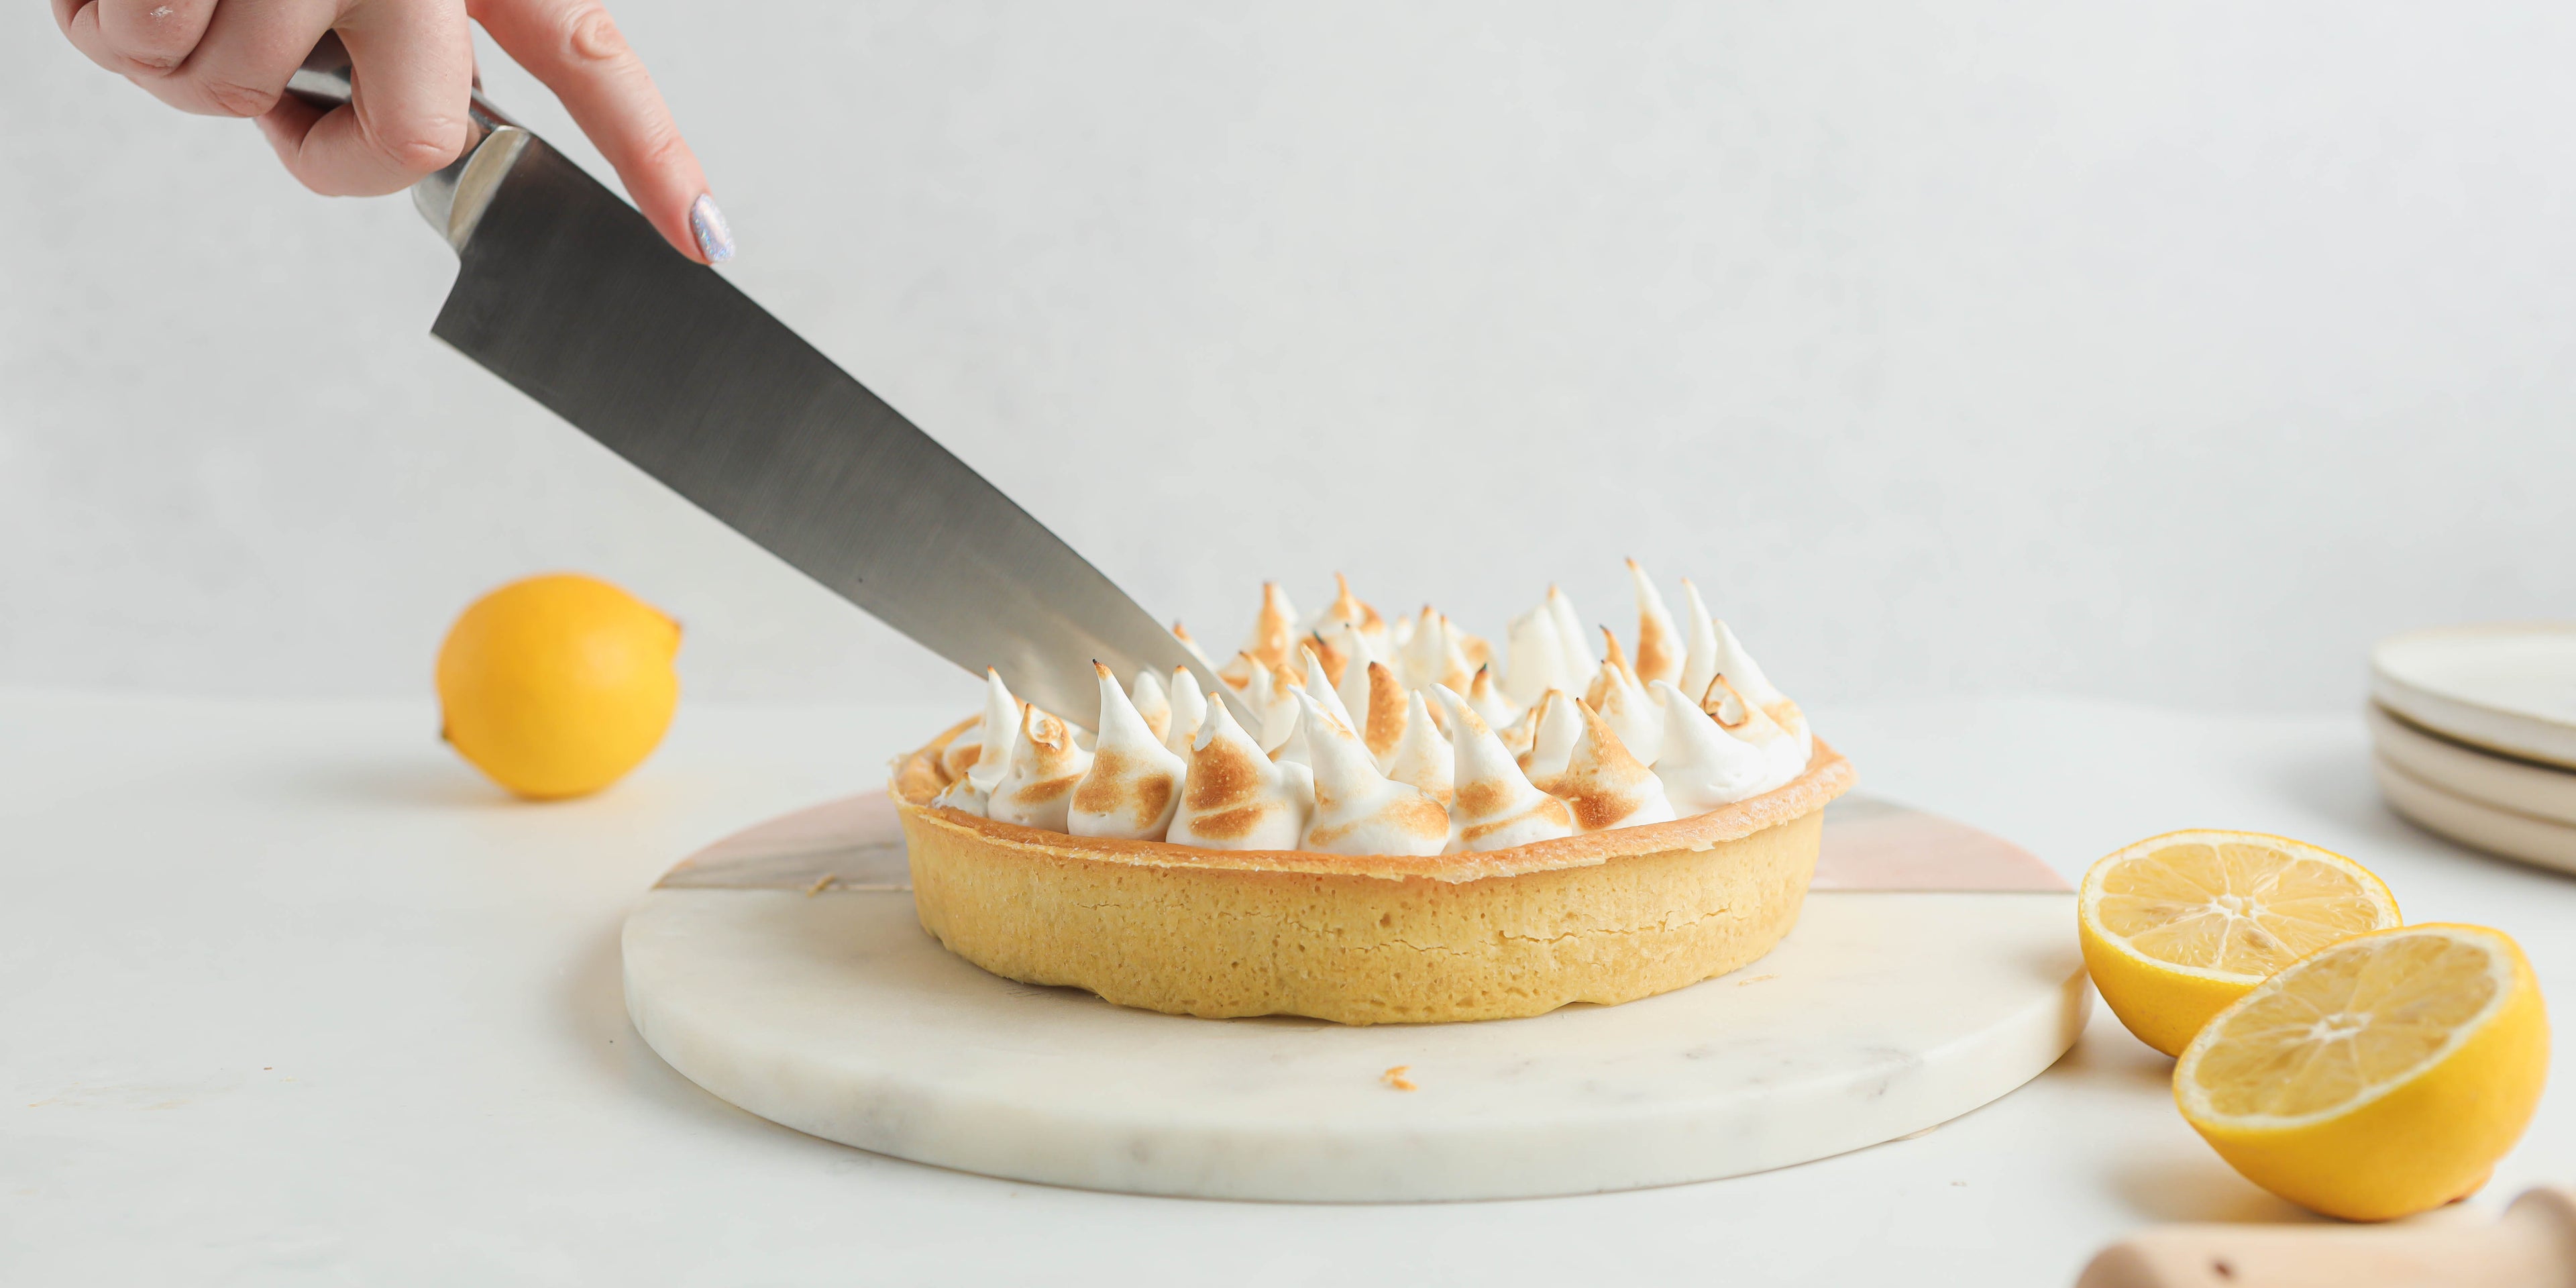 Lemon meringue pie on circular plate with knife cutting into it. Lemon slices at the side and a stack of white plates